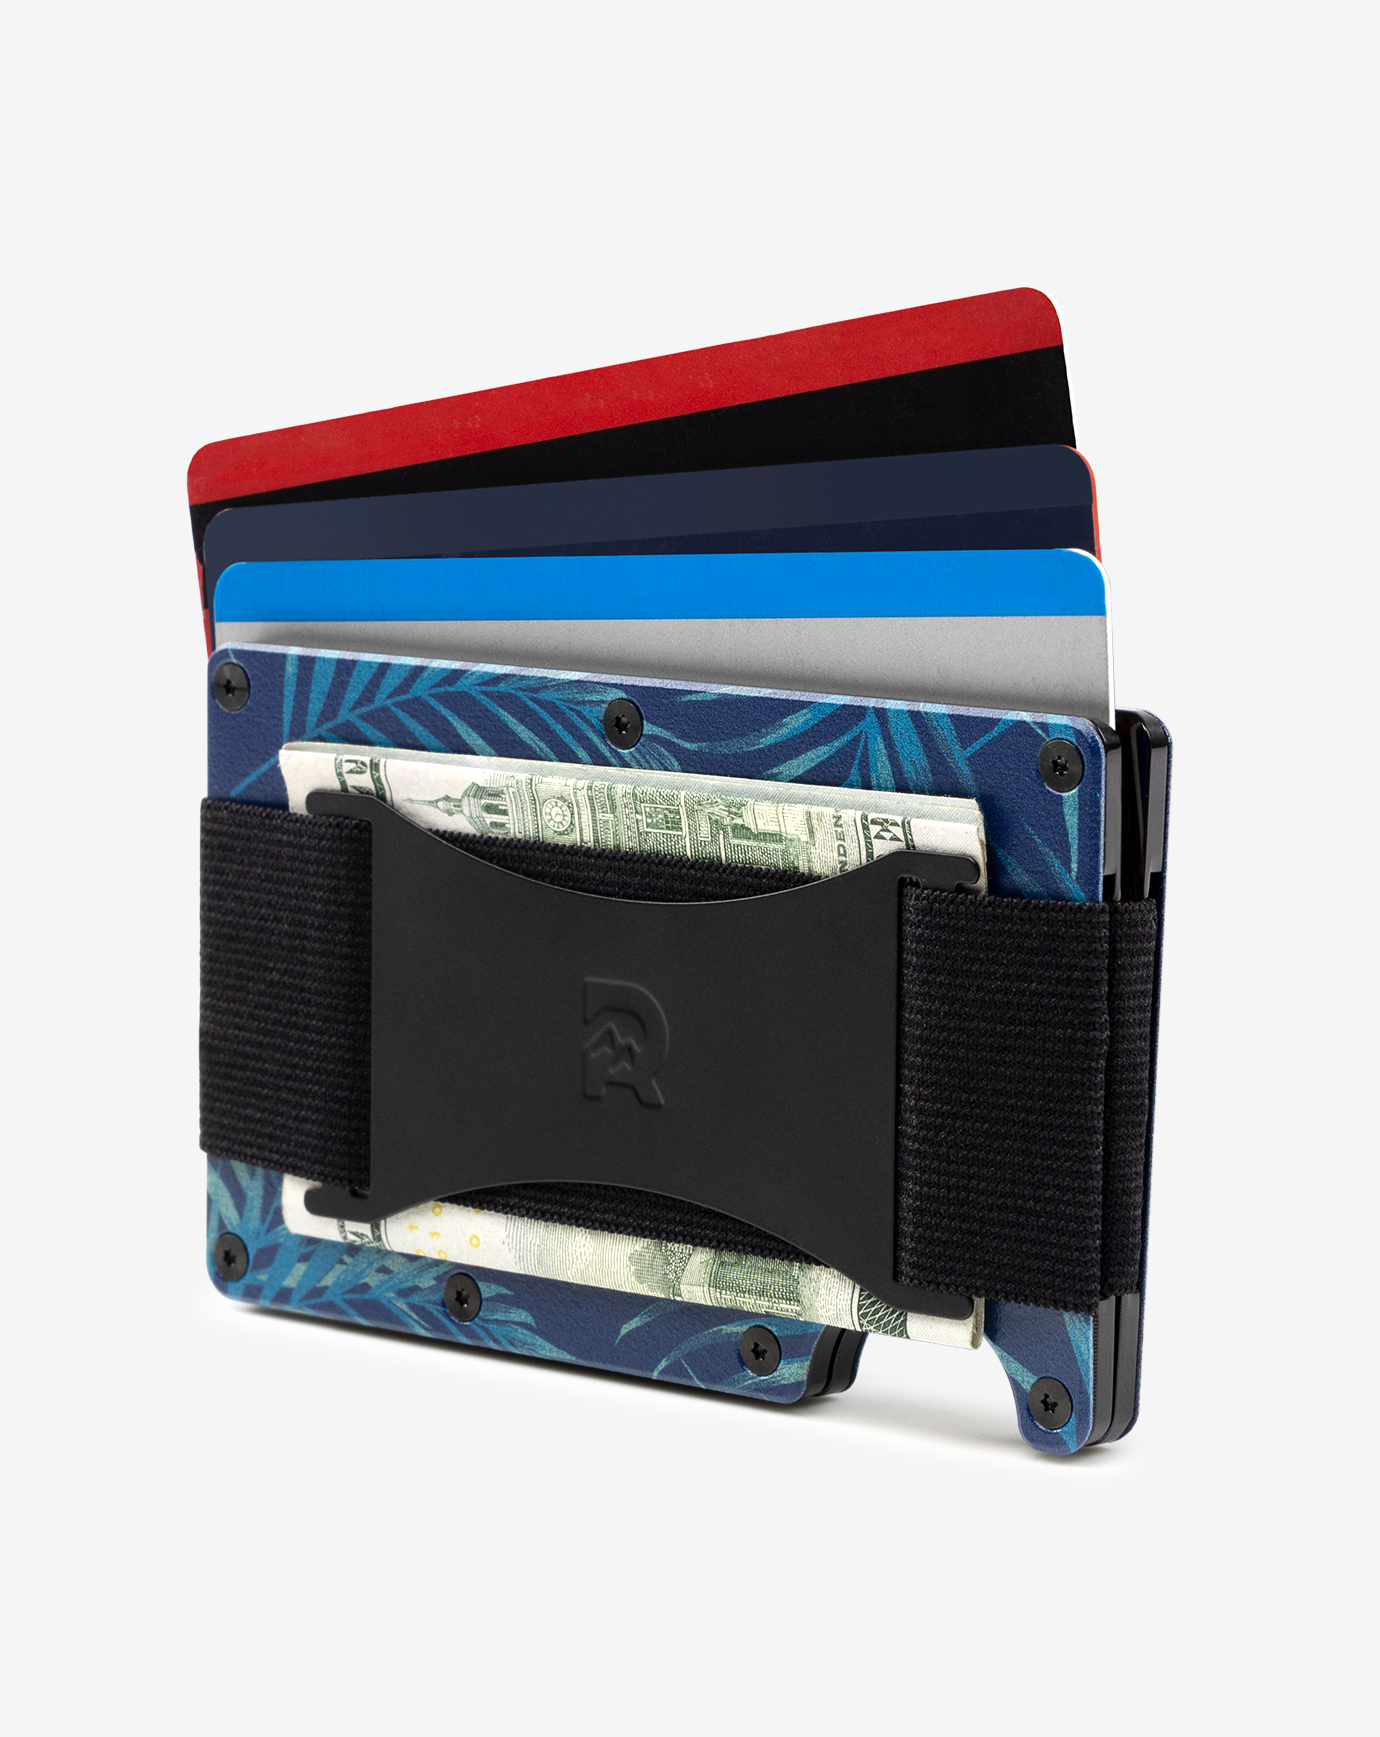 The Ridge Wallet Will Change the Way You Carry Your Essentials